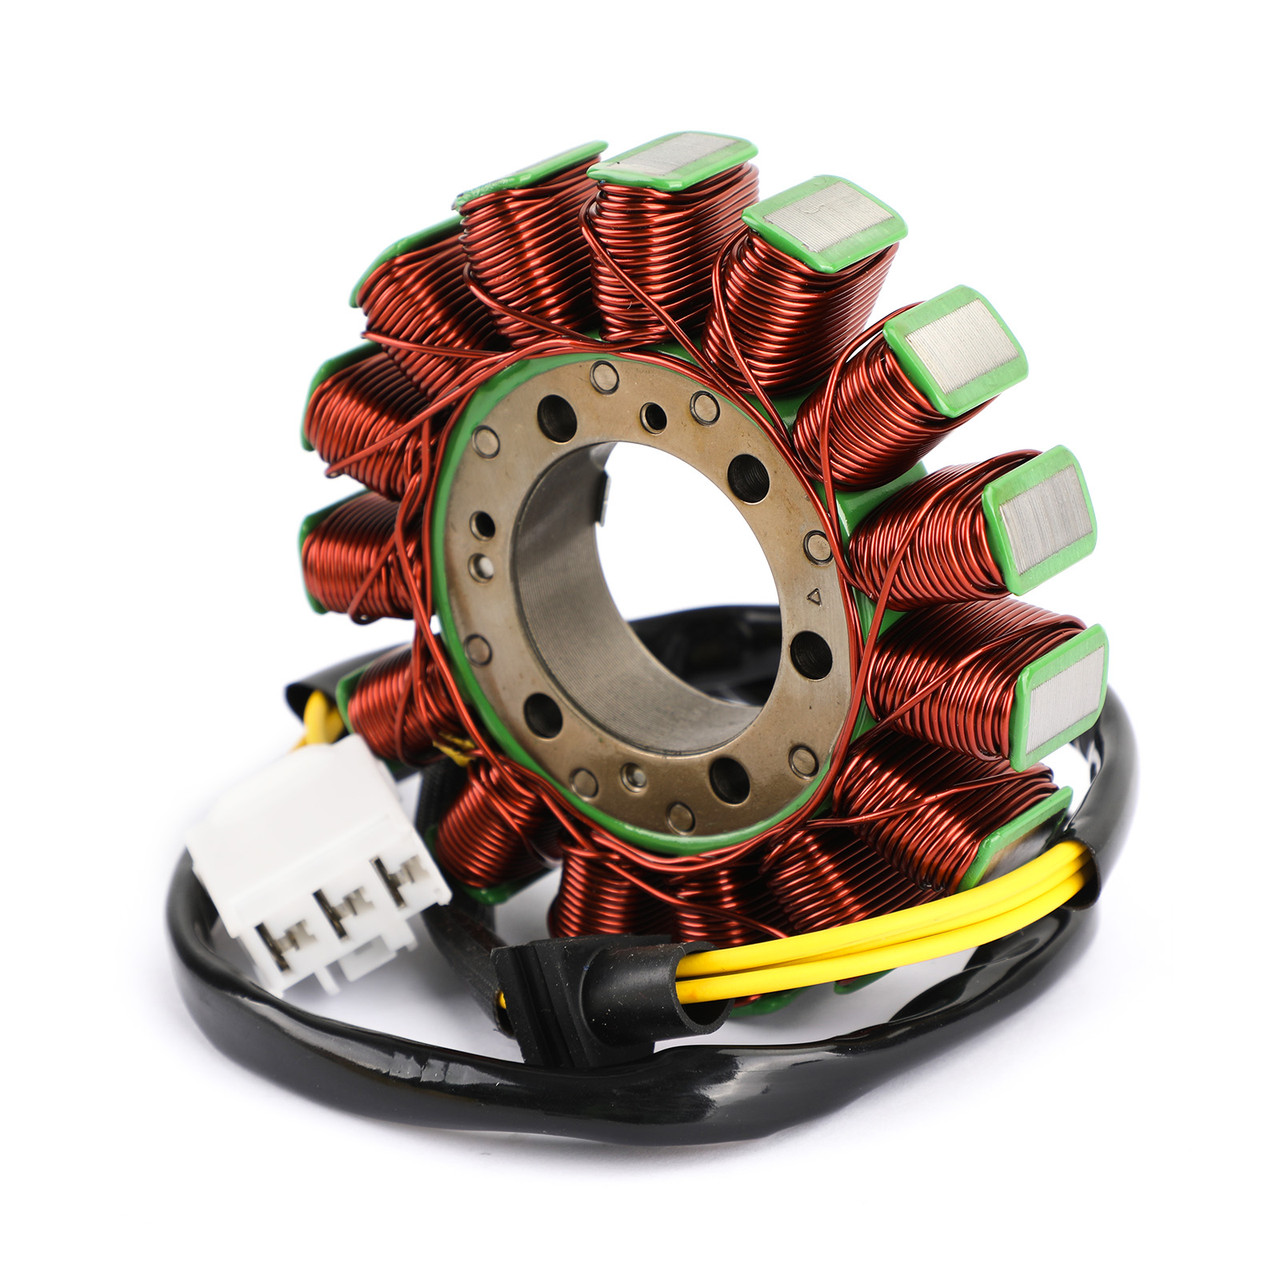 Stator Generator Fits For Honda NT700V Deauville ABS 2006-2011 31120-MEW-921